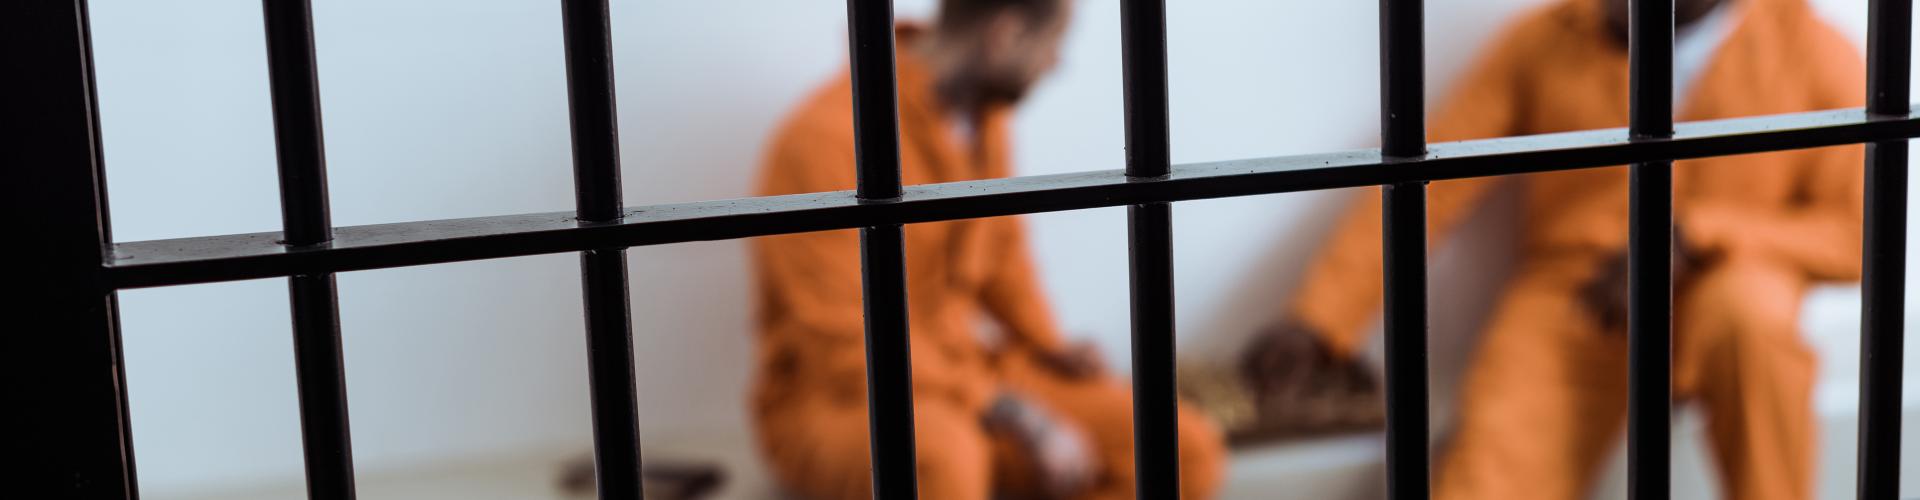 Prisoners in orange jumpsuit playing a game behind bars